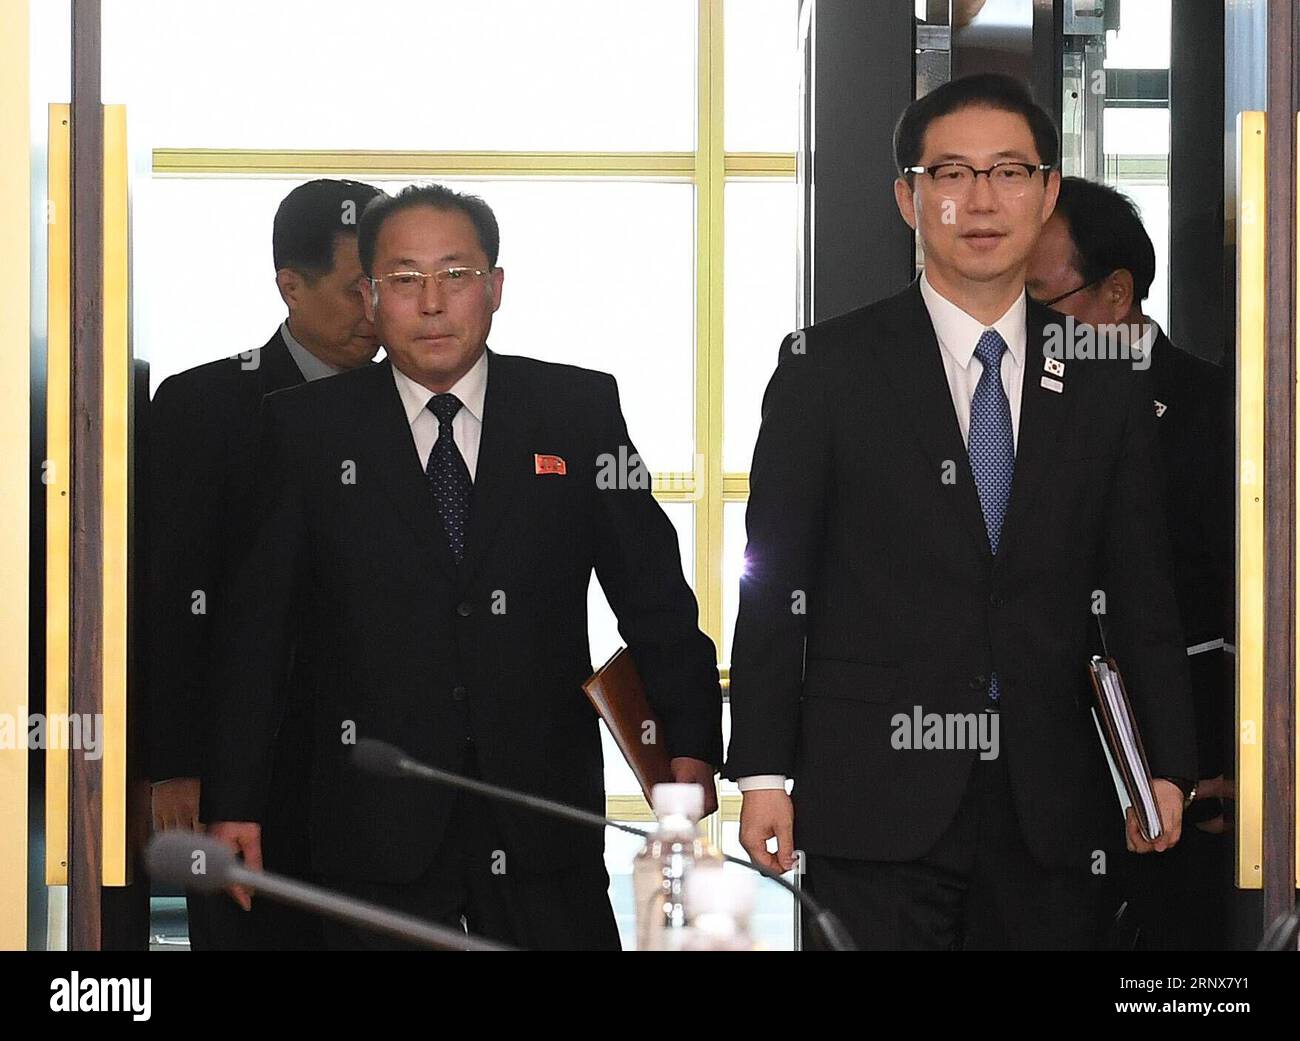 (180117) -- SEOUL, Jan. 17, 2018 () -- Chun Hae-sung(R), vice unification minister of South Korea, and Jon Jong Su, vice chairman of the Committee for the Peaceful Reunification of the Fatherland of the Democratic People s Republic of Korea (DPRK), arrive for talks at the truce village of Panmunjom, Jan. 17, 2018. Working-level talks between South Korea and DPRK were underway Wednesday at the truce village of Panmunjom to discuss the DPRK s dispatch of athletes to the South Korea-hosted Winter Olympics, Seoul s Unification Ministry said. (/South Korean Unification Ministry) (psw) SOUTH KOREA-D Stock Photo